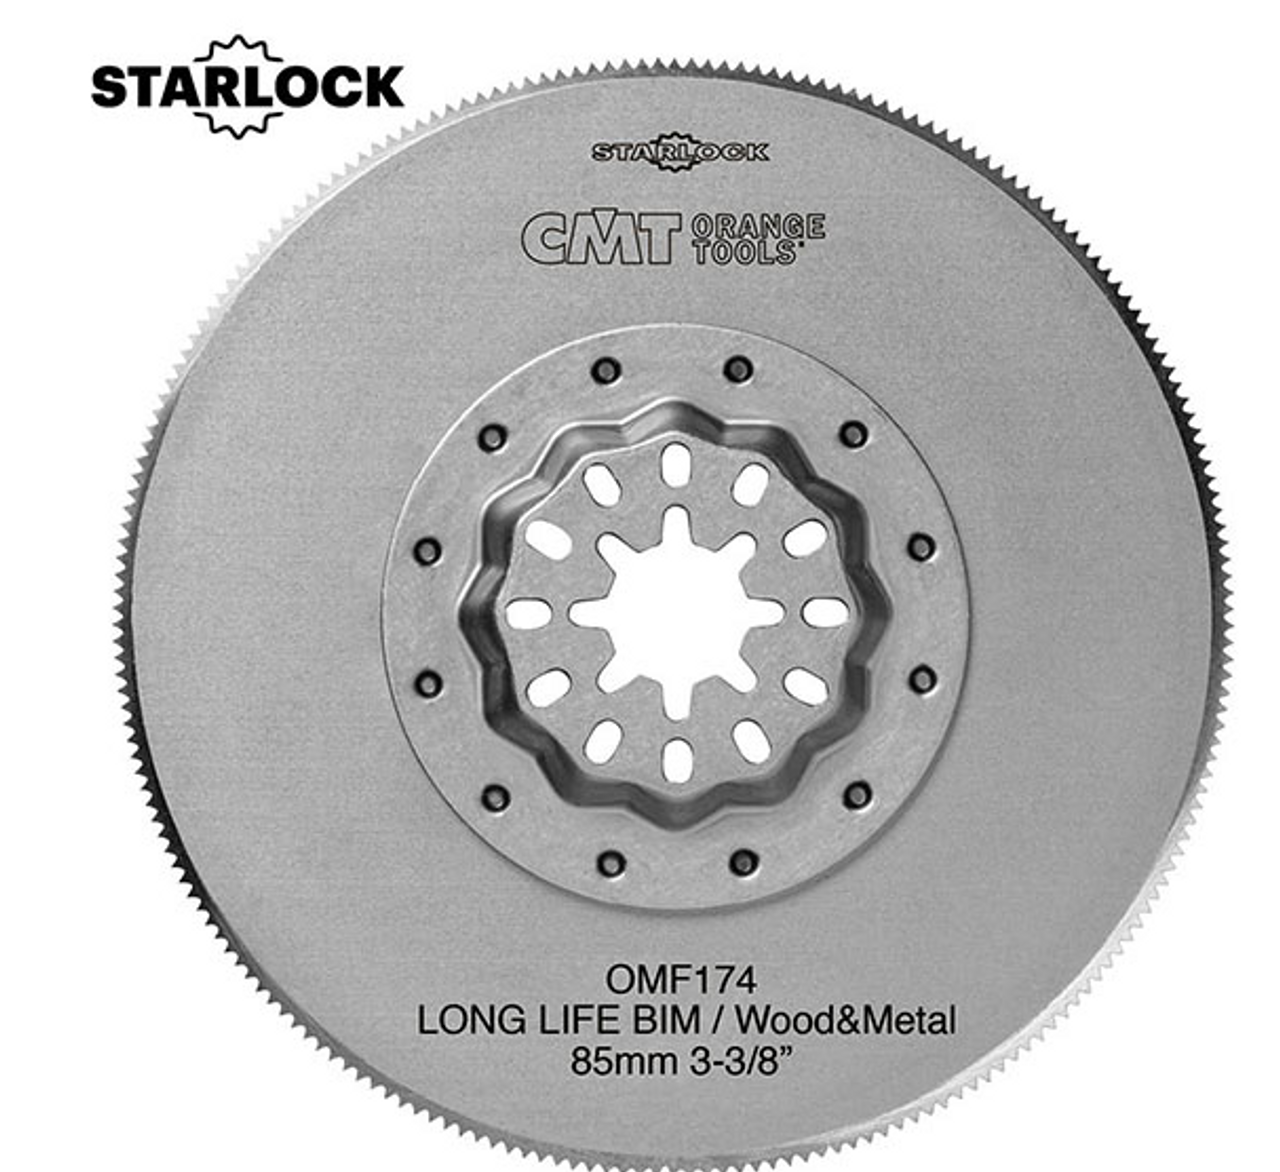 CMT OMF174-X1,85mm (3-3/8") Circular Saw Blade for Wood & Metal. Long Life